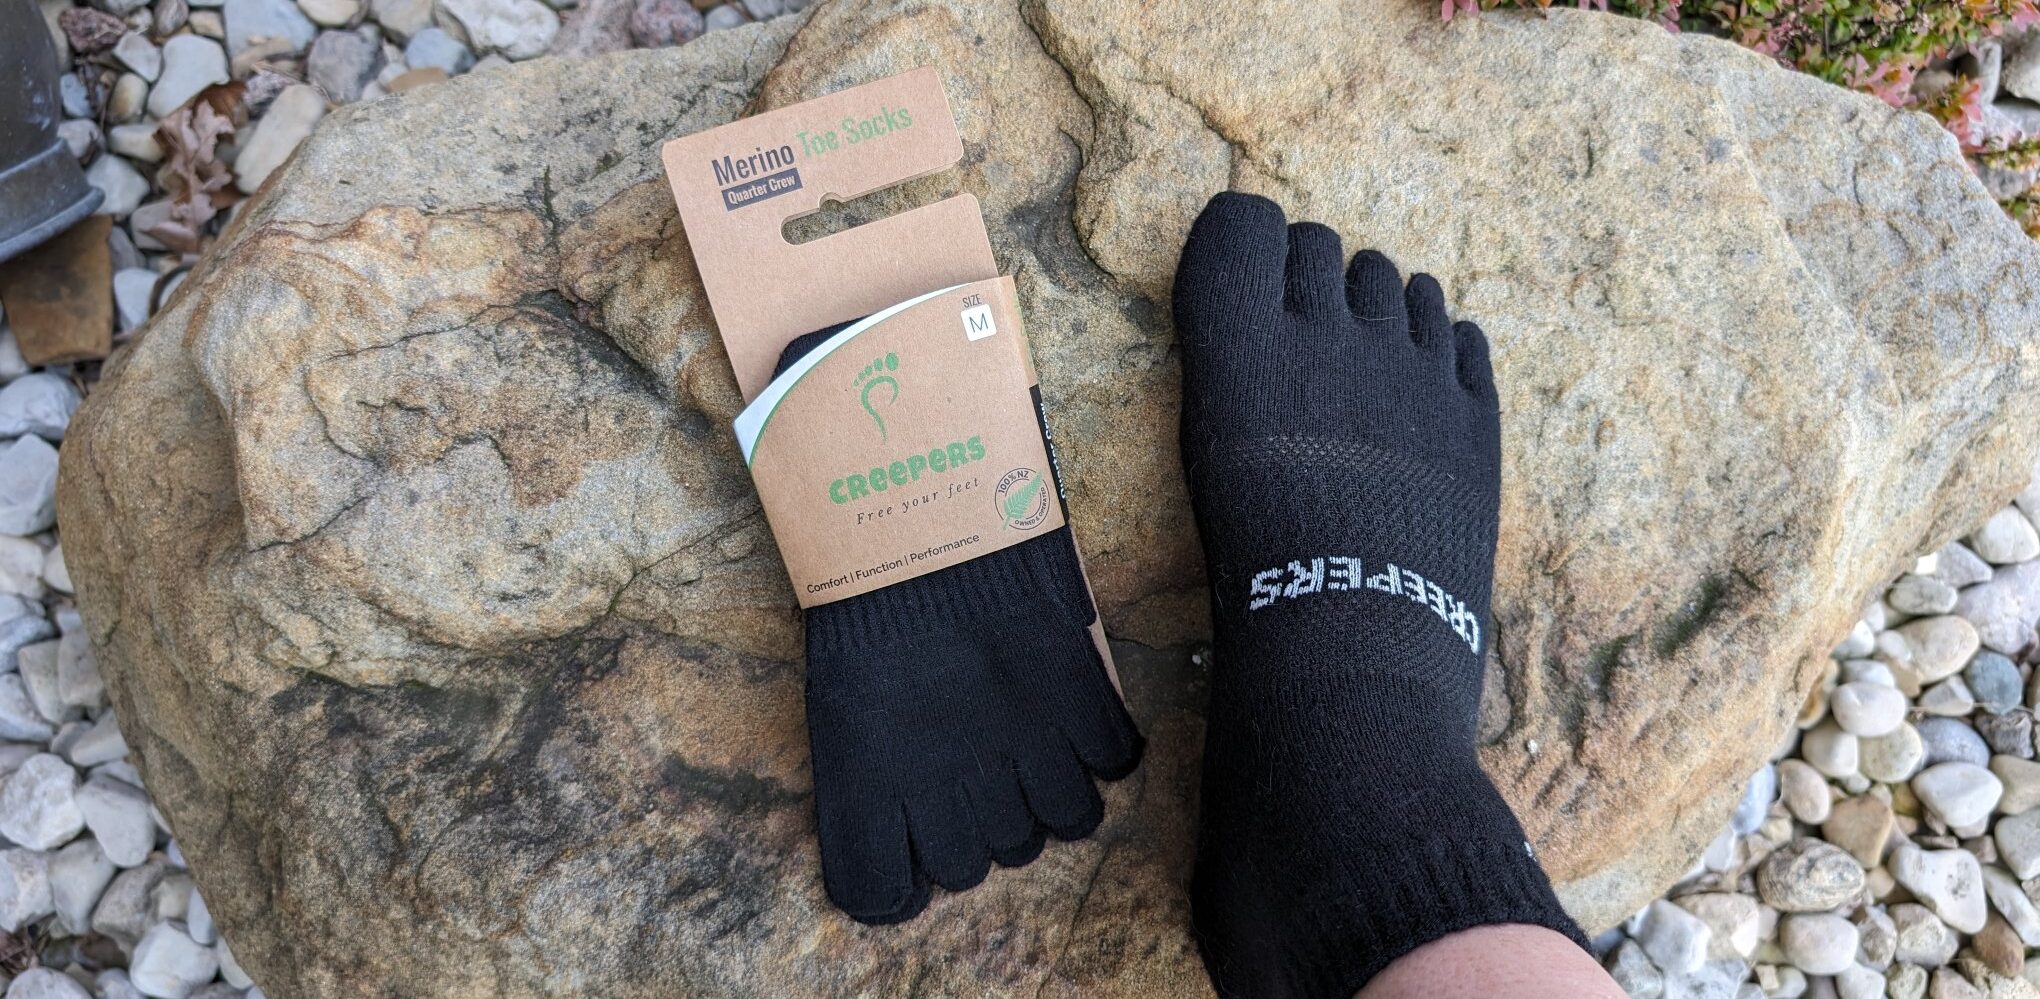 Creepers Merino toe socks in package and one being modeled on a foot.